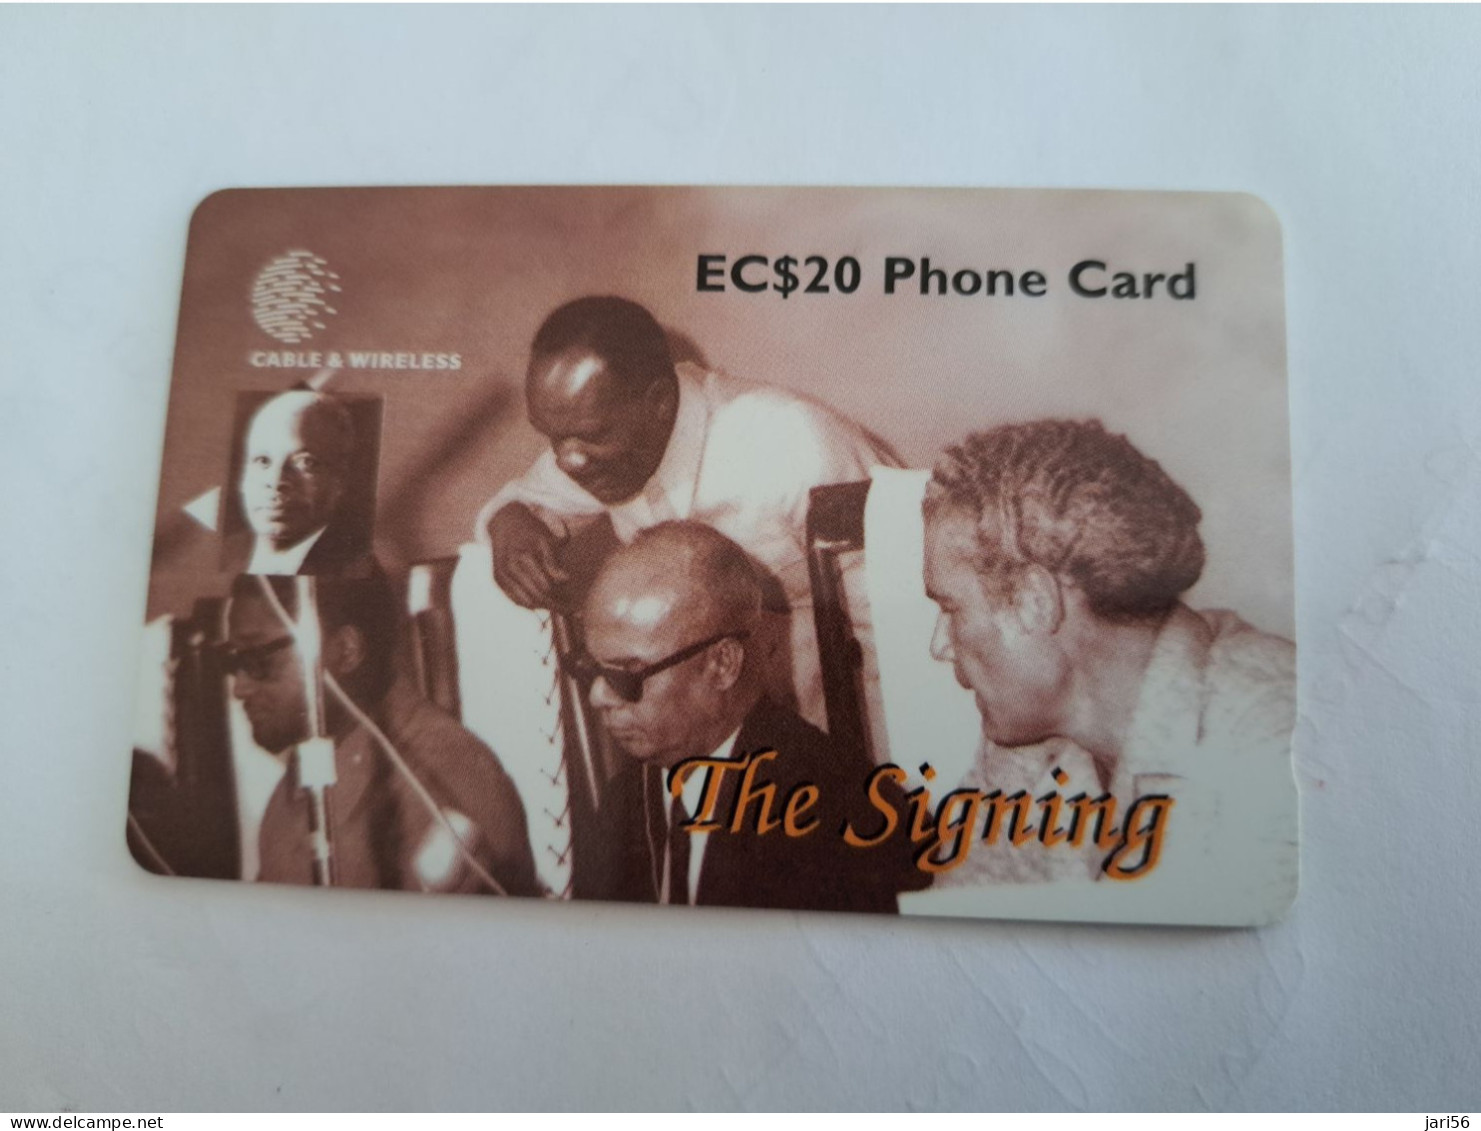 ST LUCIA    $ 20   CABLE & WIRELESS  STL-254B  254CSLB     THE SIGNING   Fine Used Card ** 14273** - Sainte Lucie